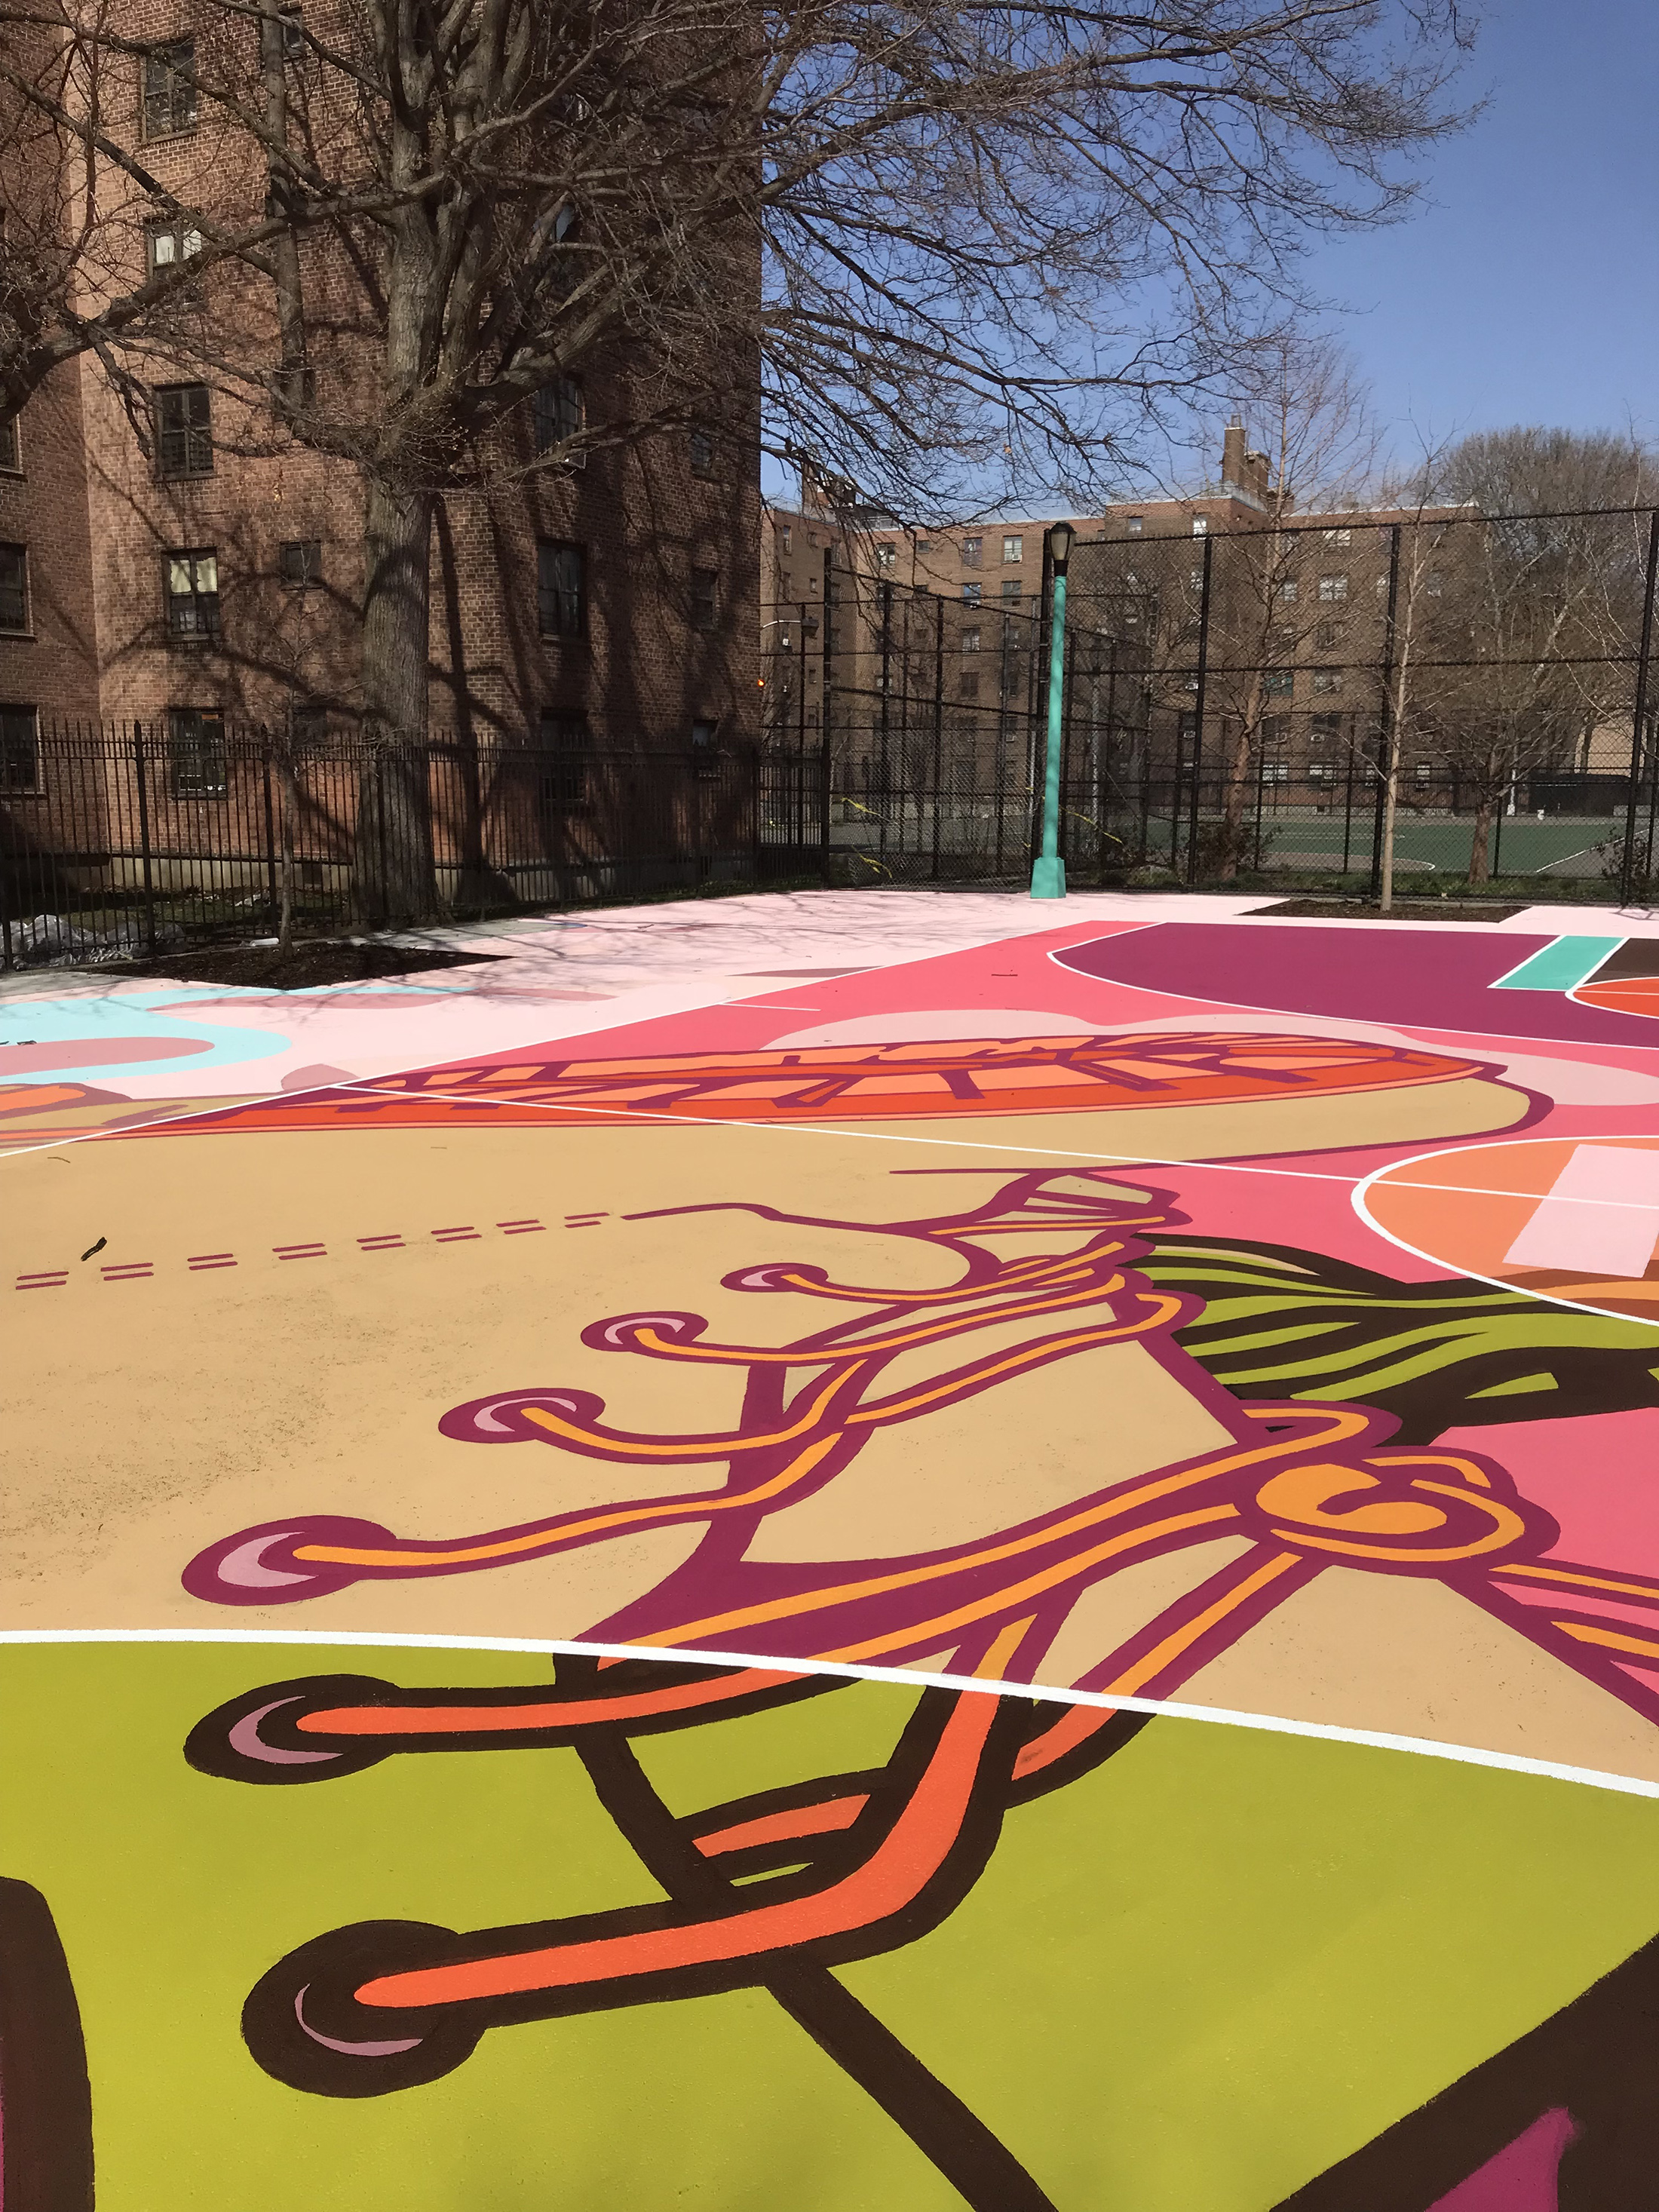 Askew, basketball court mural, Tracy Morgan, The Last OG, Brooklyn, G Train, Masterpiece NYC, masterpiece murals, hand painted mural, office mural, custom mural, mural, graffiti mural, graffiti artist for hire, graffiti mural, graffiti artist